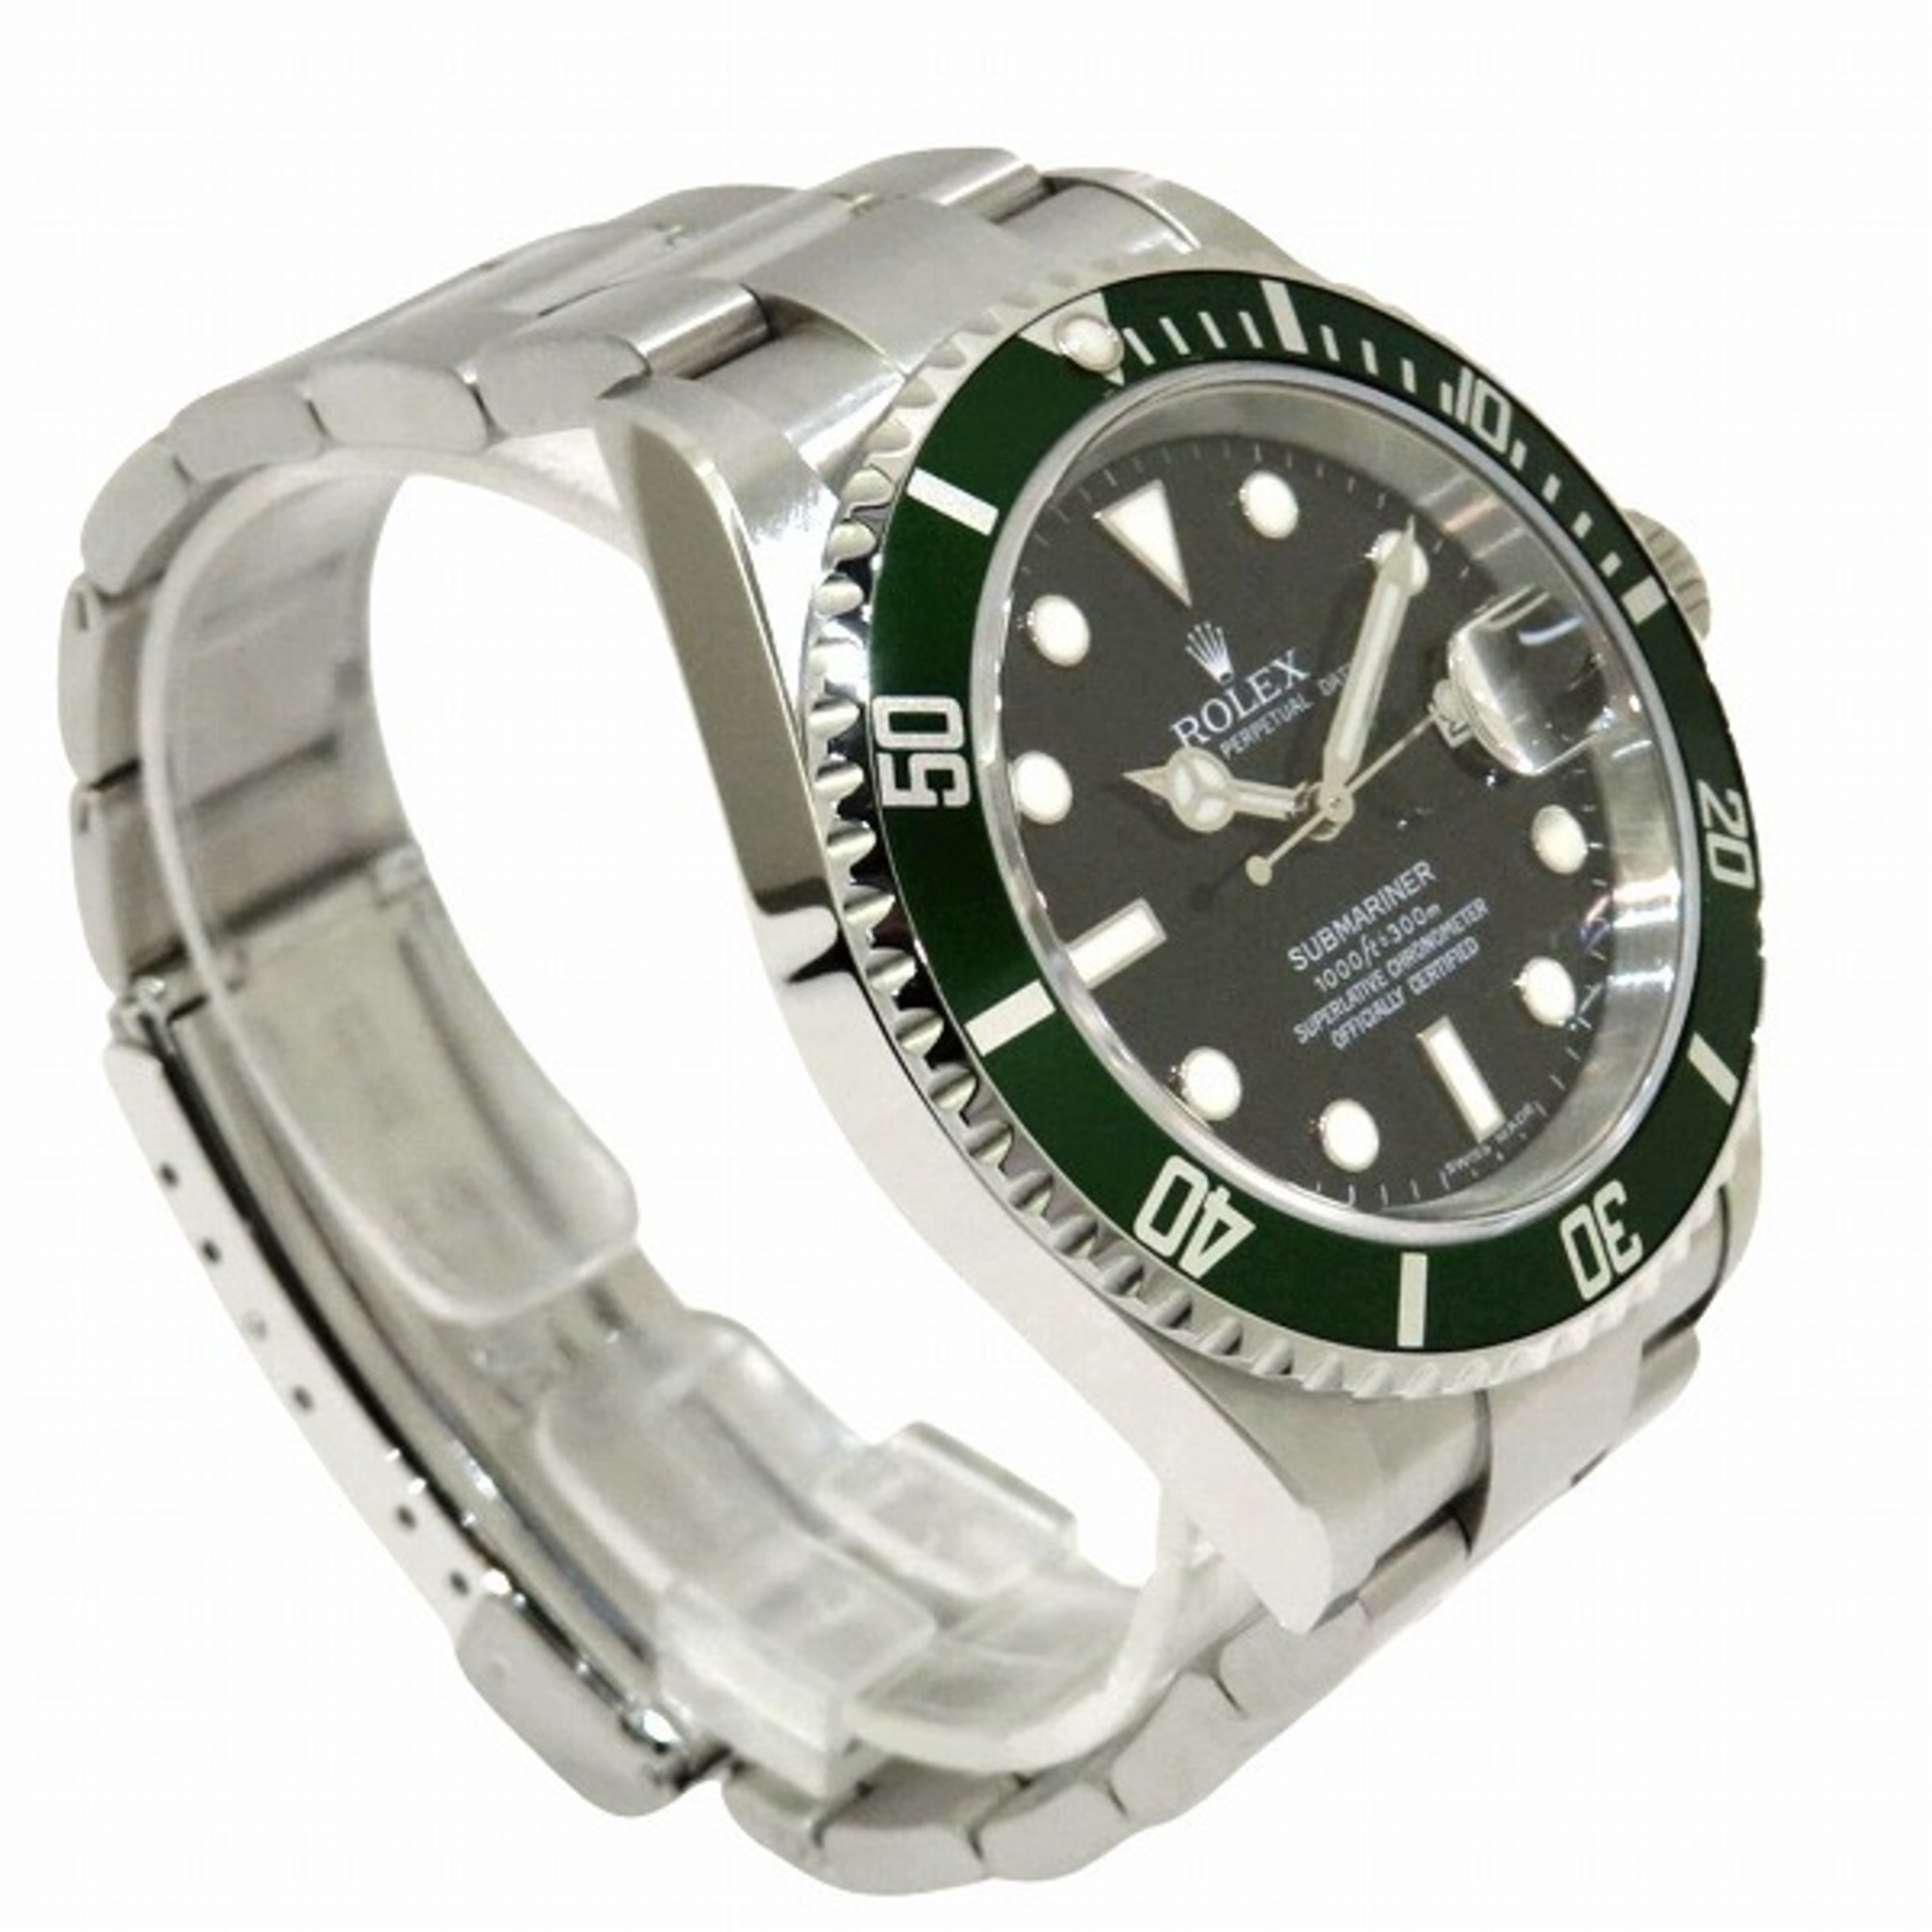 Rolex Submariner 16610LV Automatic Green D Number Watch Men's